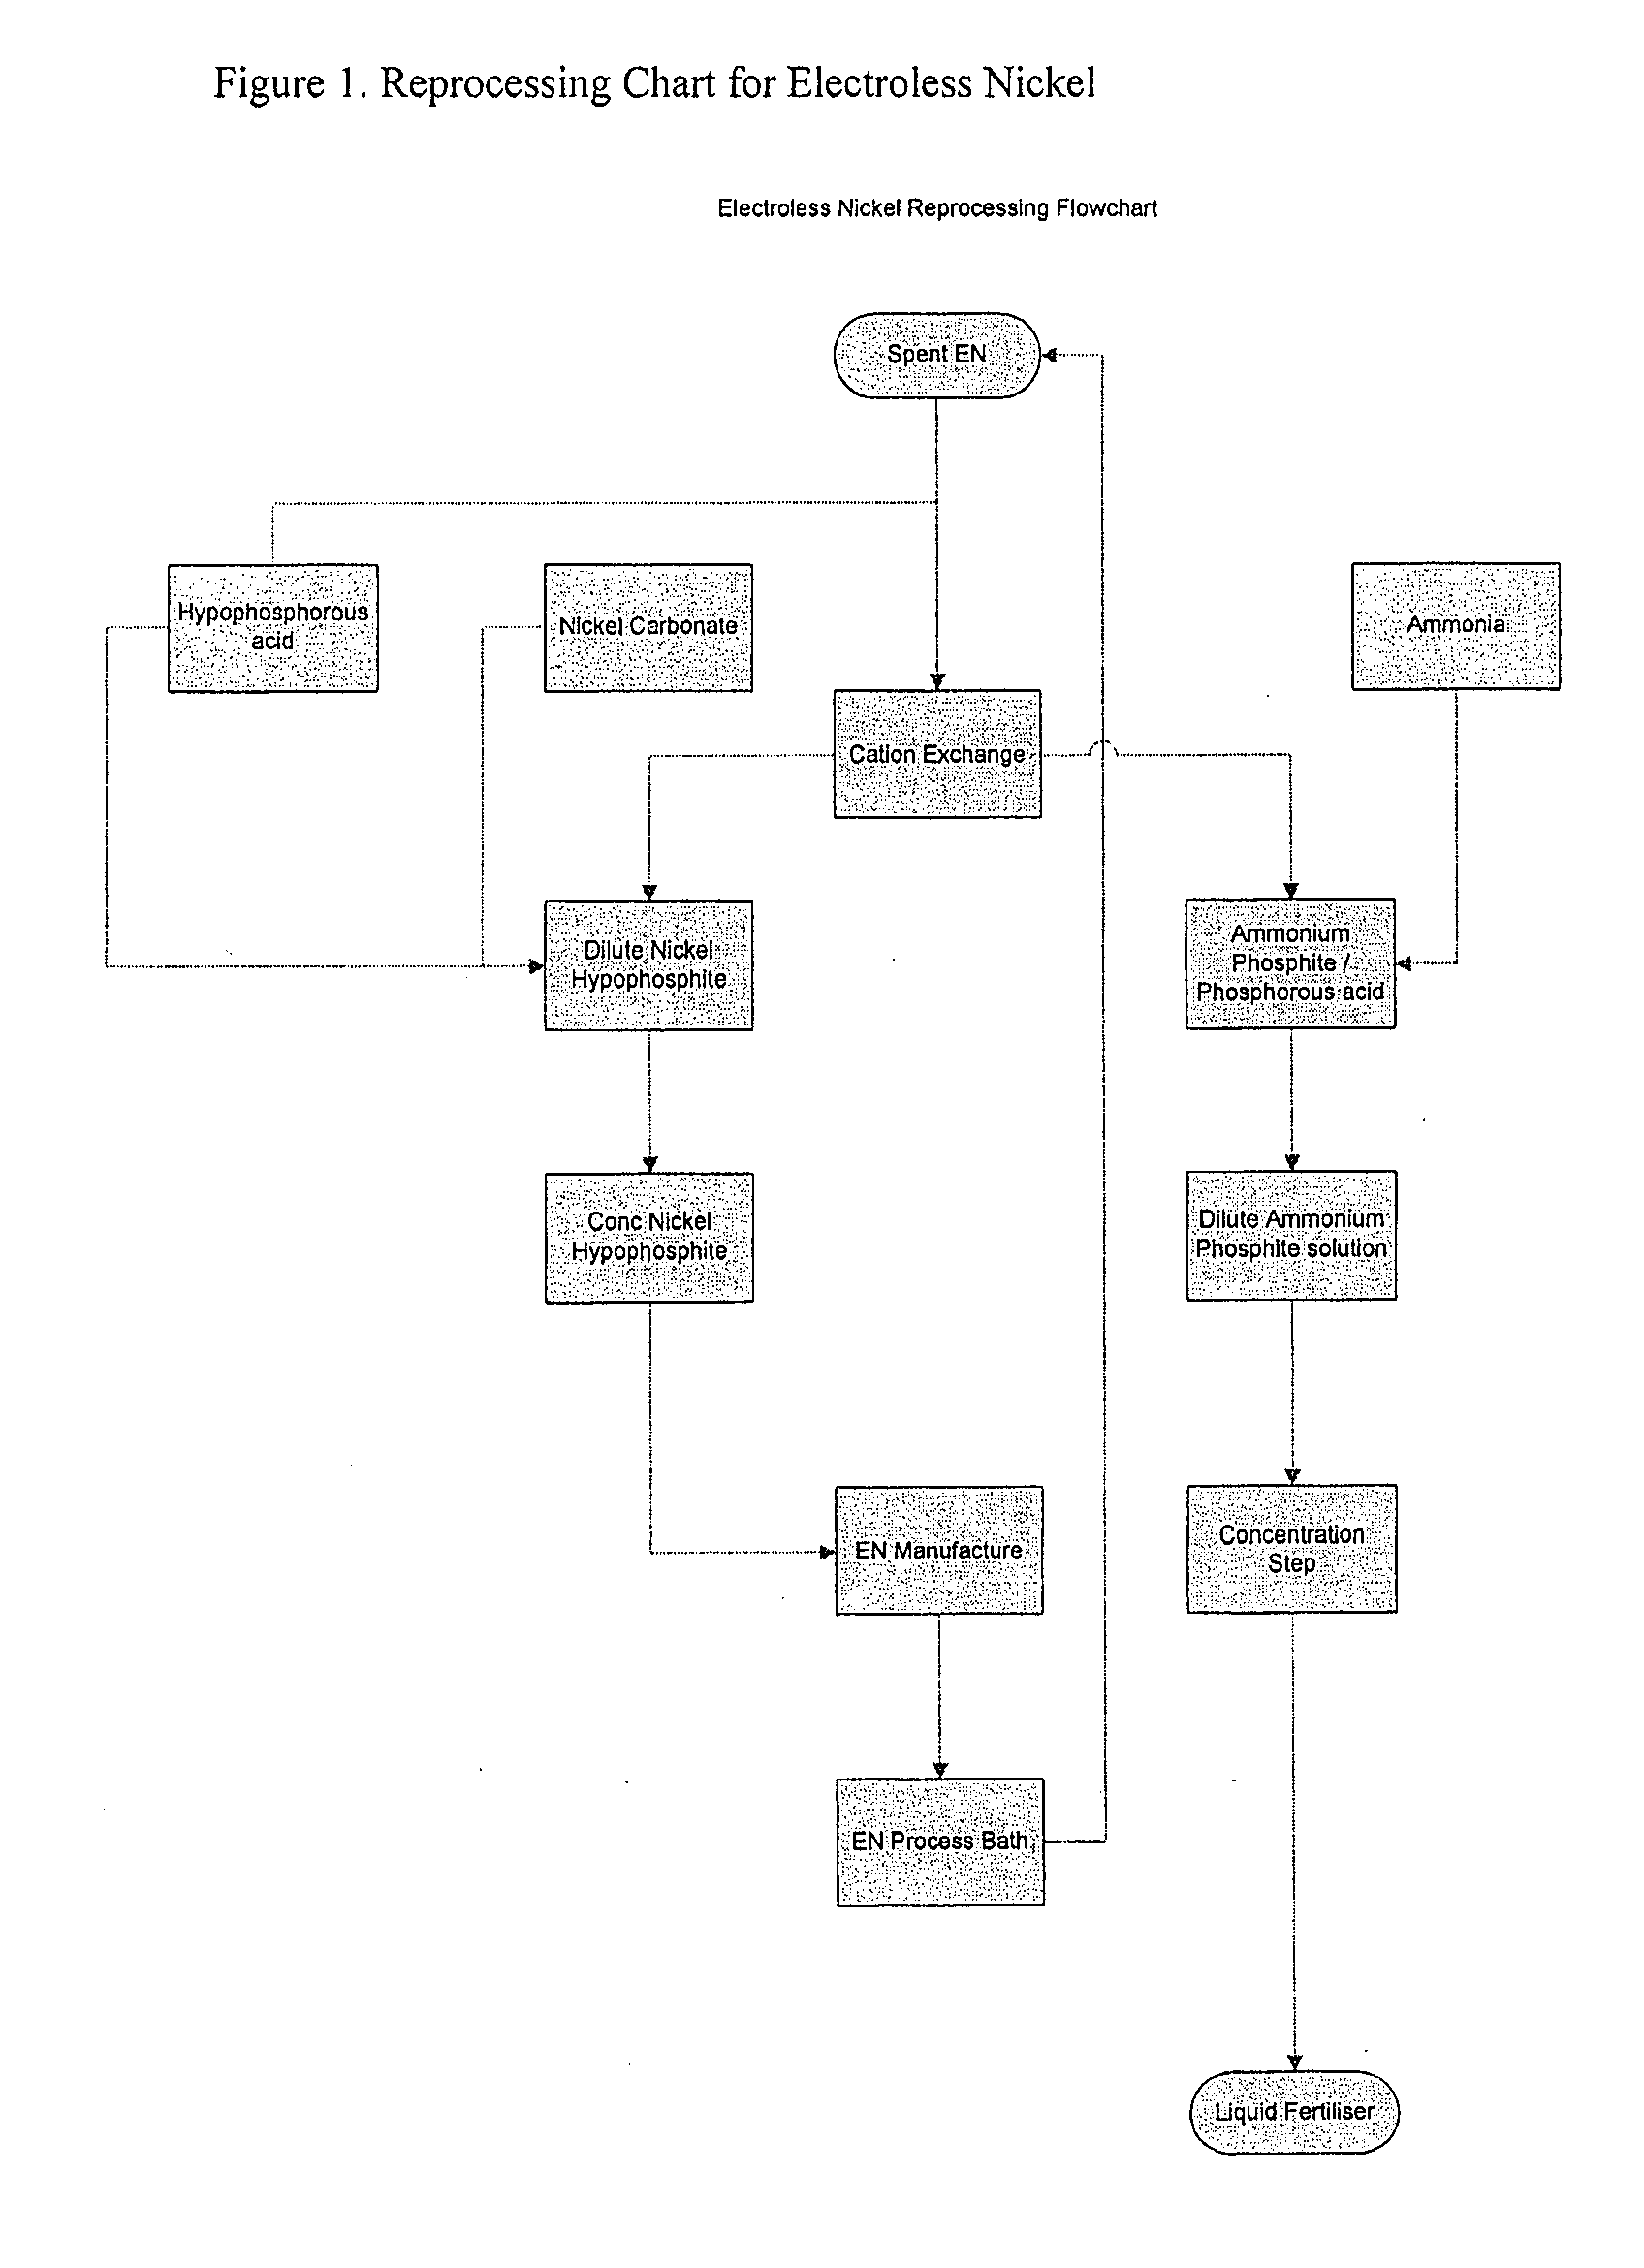 Method of recycling electroless nickel waste